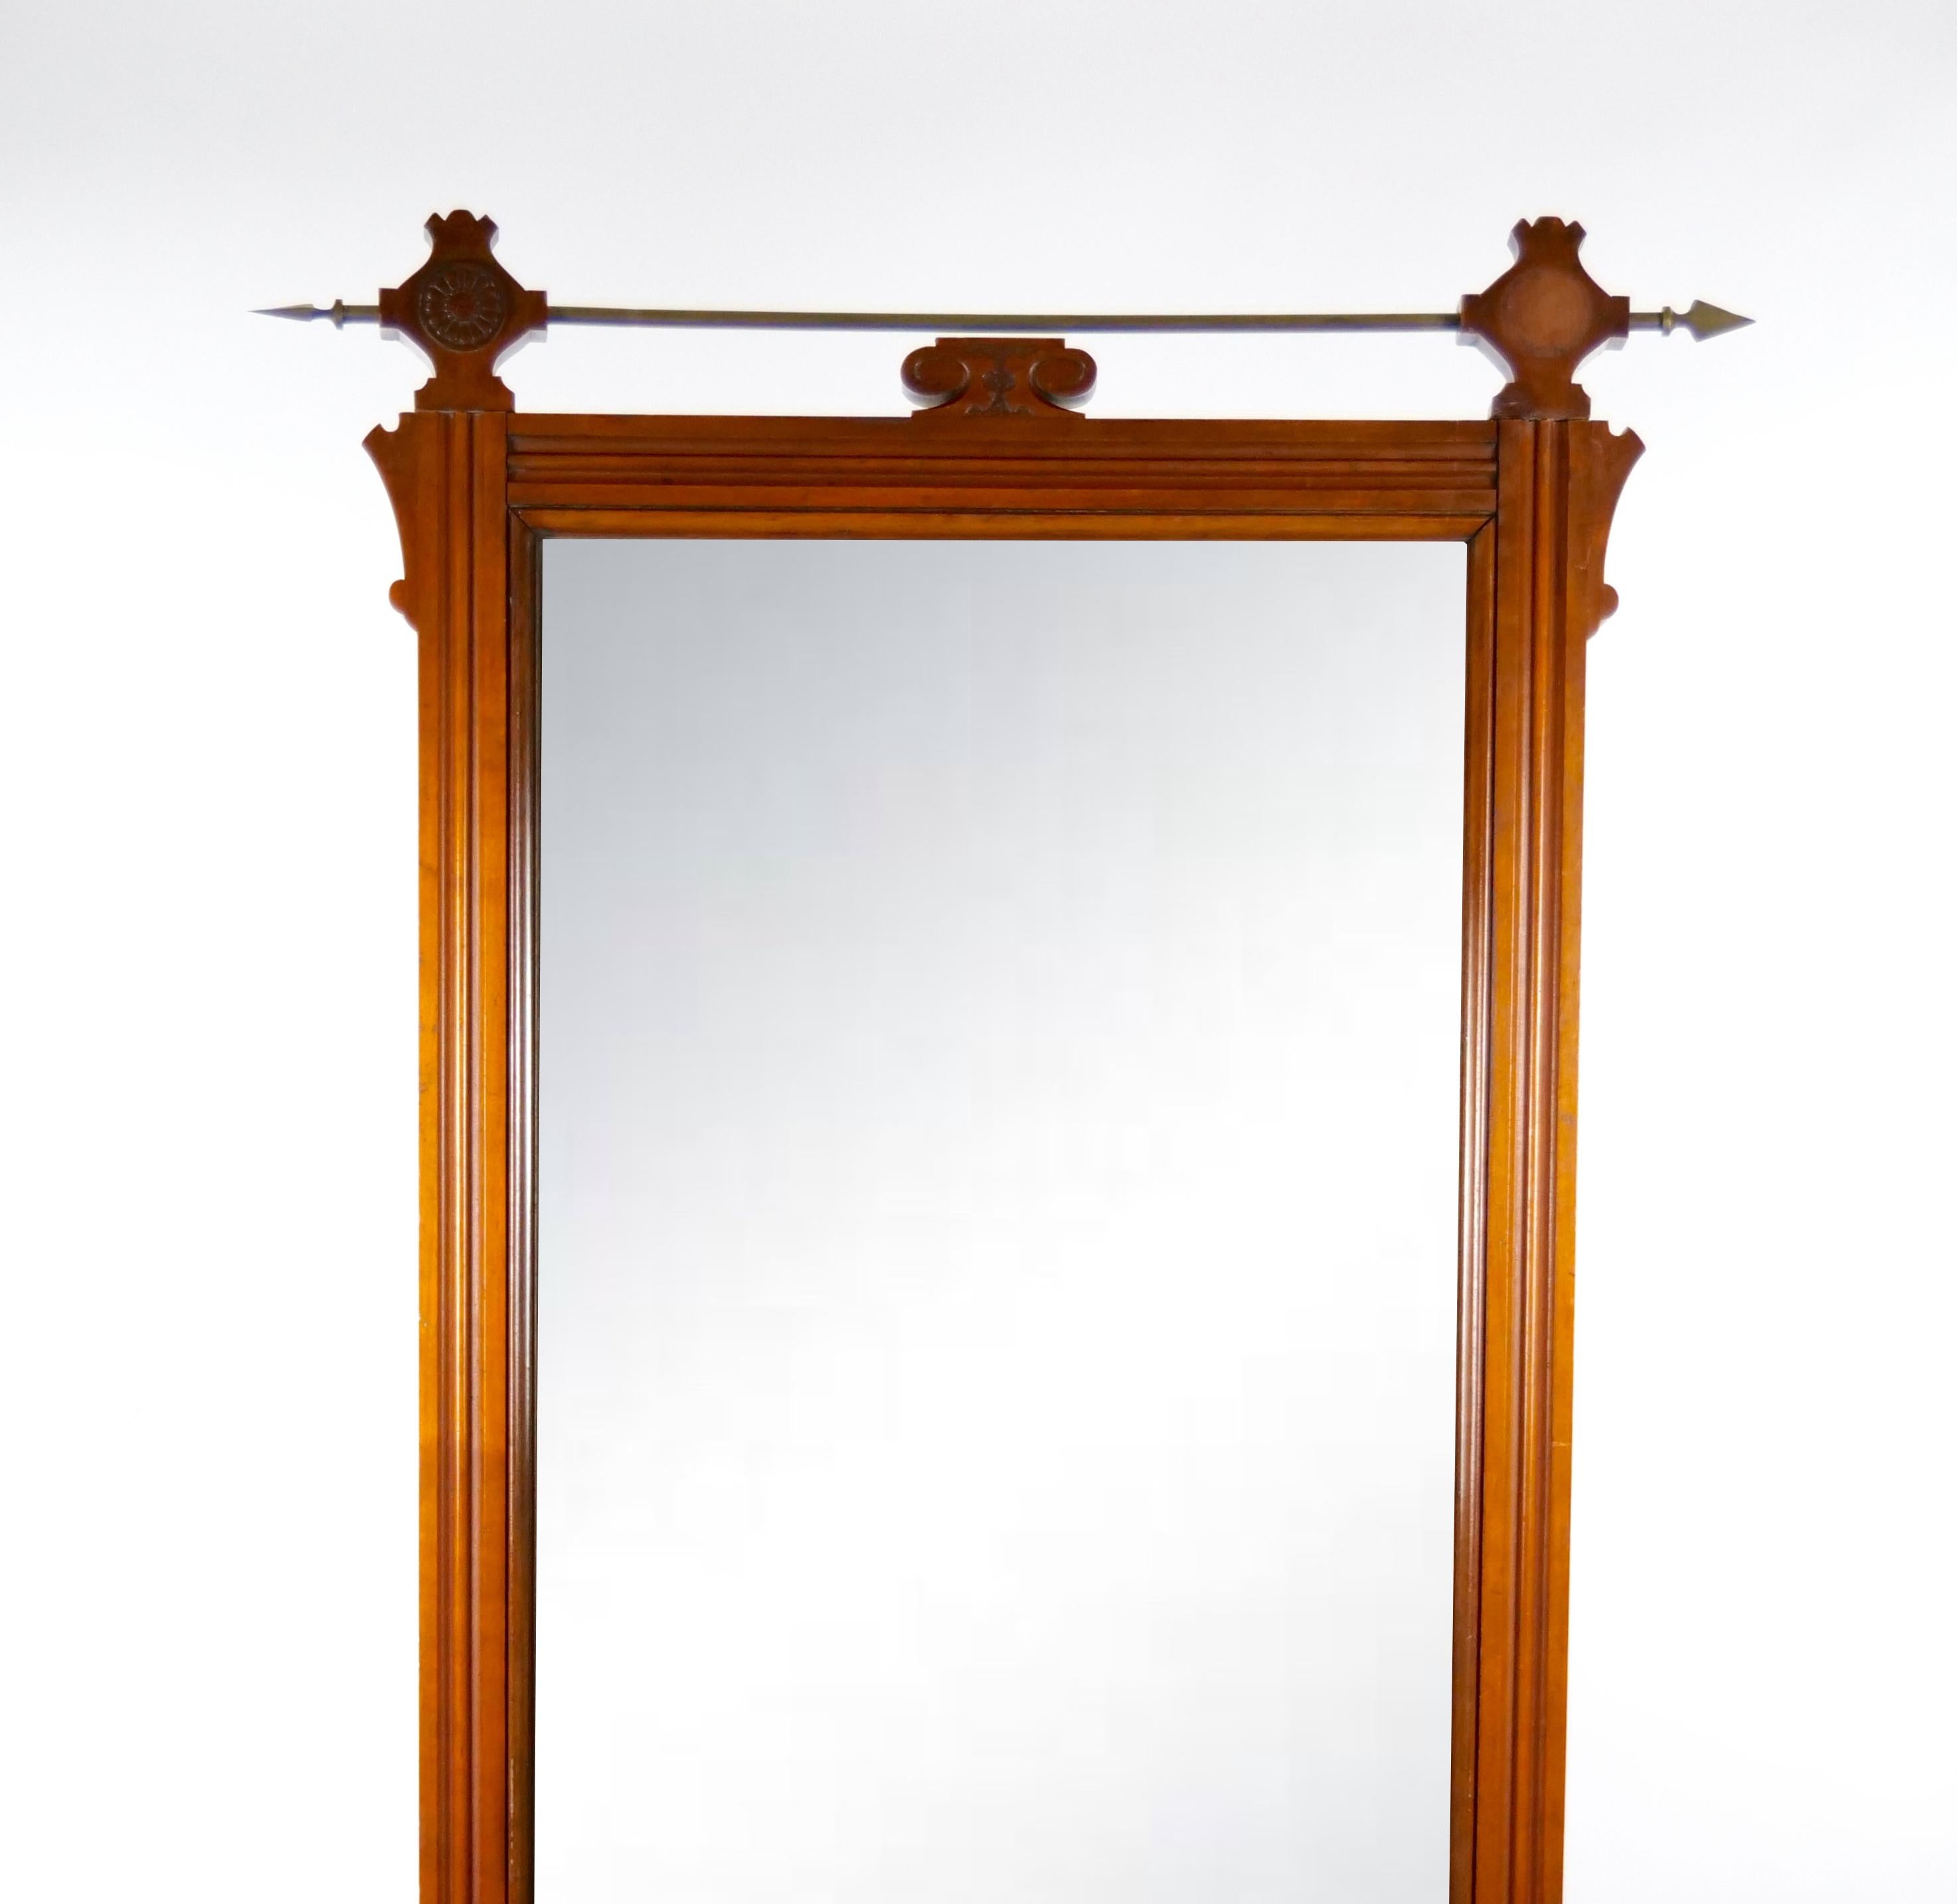 
Step into a world of refined elegance with our extraordinary antique  hand carved mahogany wood framed adorned with exquisite gilt brass design details. This remarkable hanging wall mirror embodies the timeless craftsmanship of the bygone era,